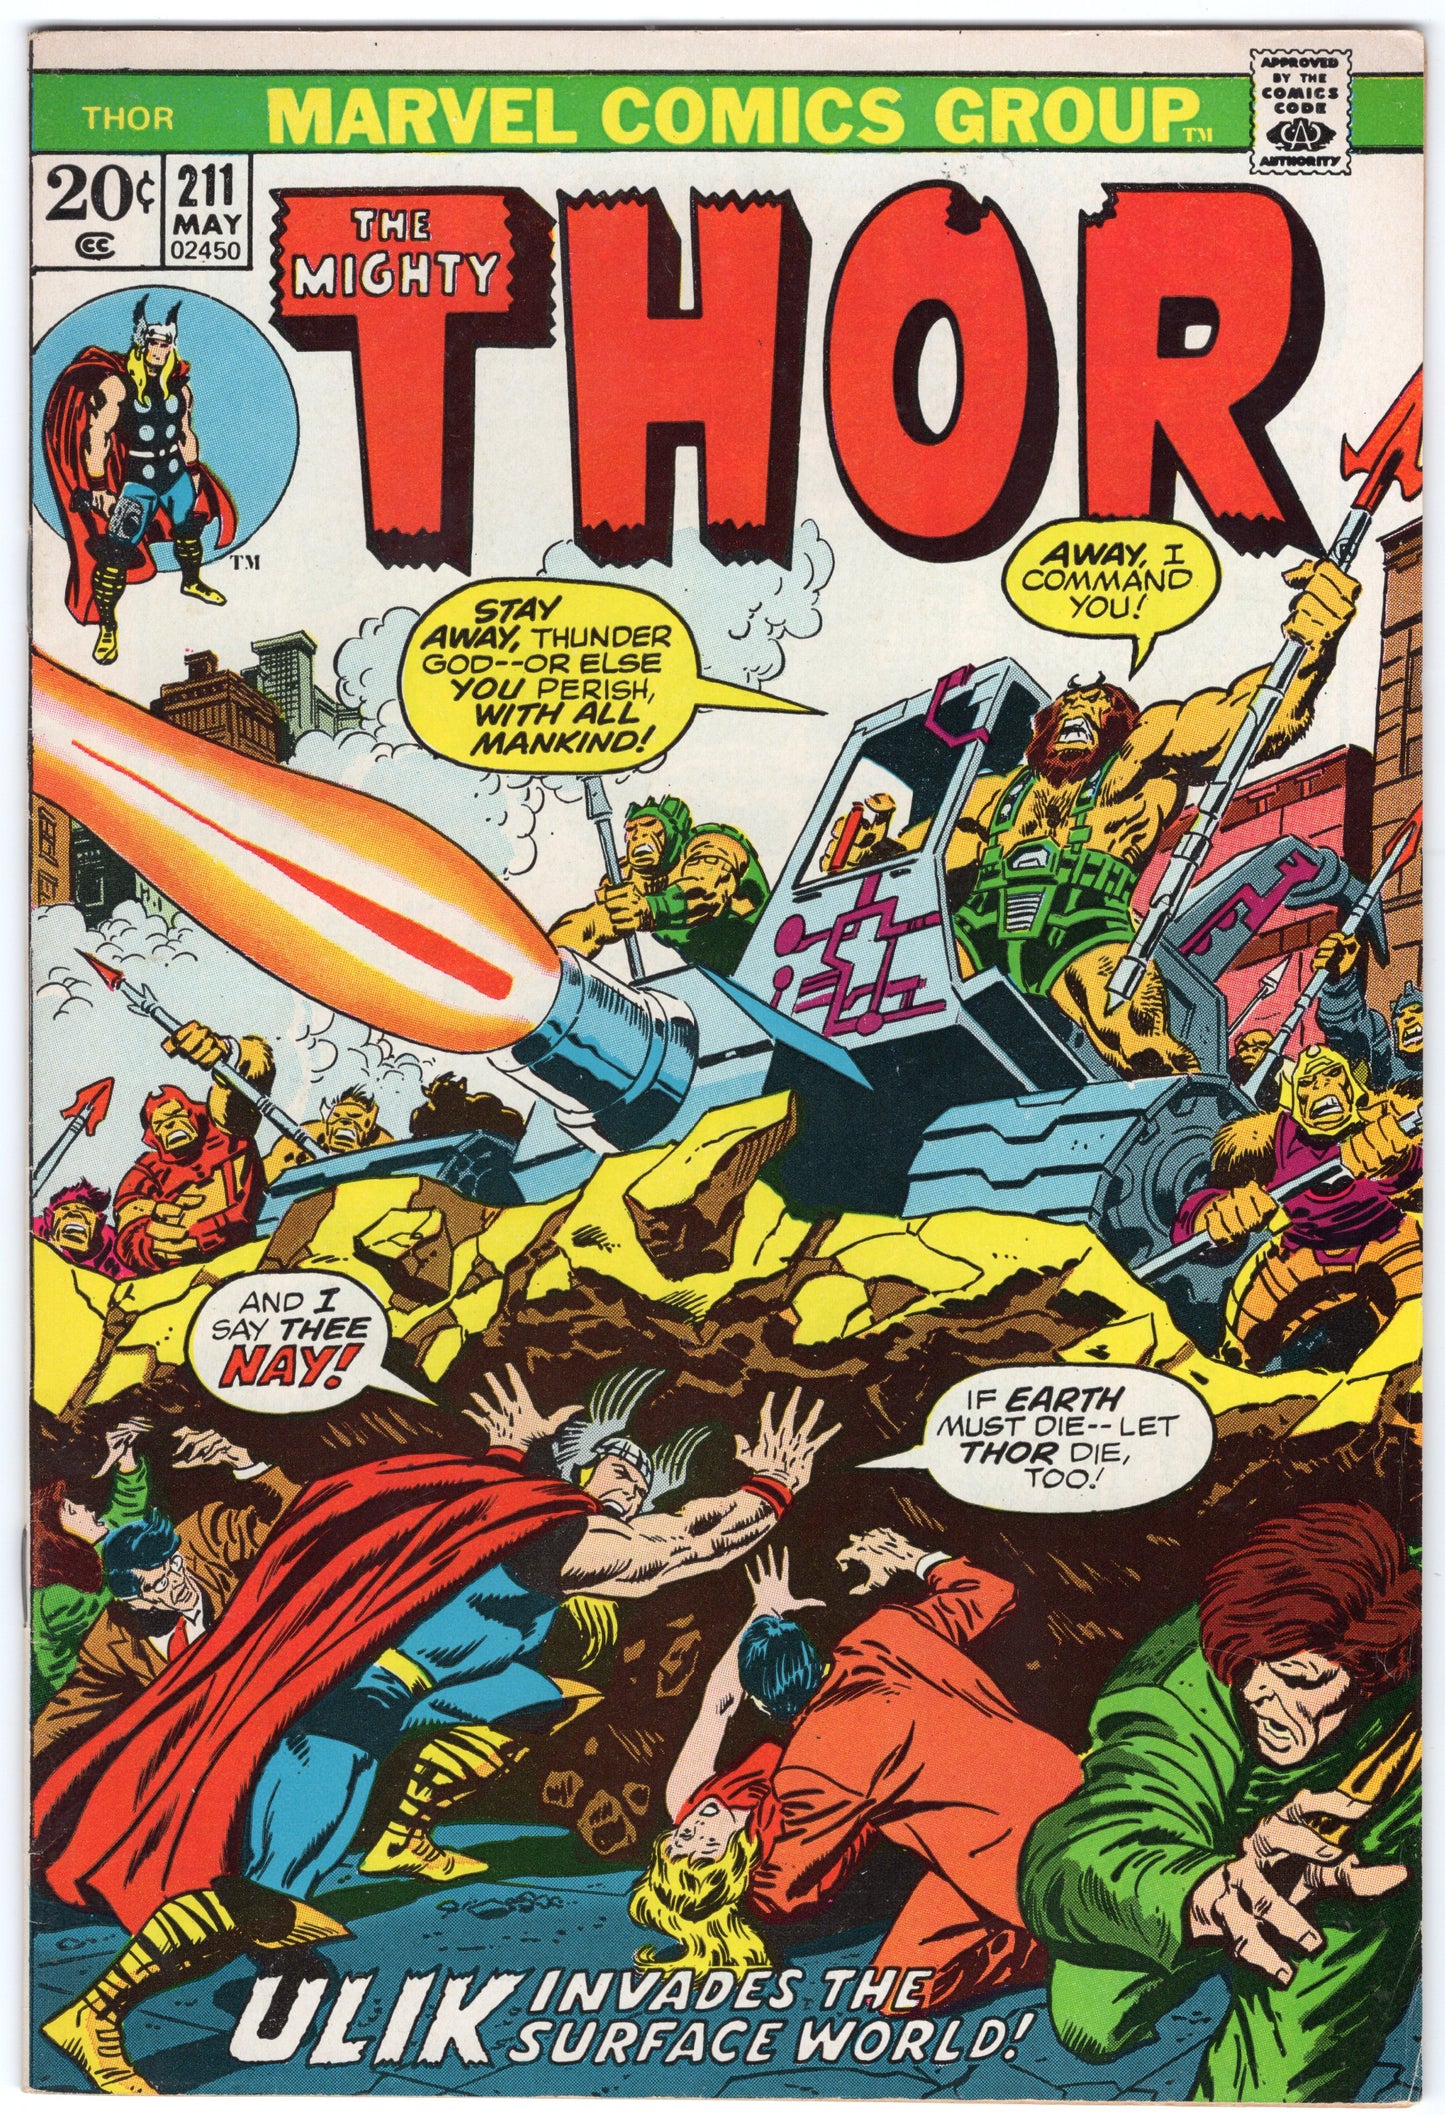 Thor - Issue #211 "The End of the Battle!" (May, 1973 - Marvel Comics) FN+